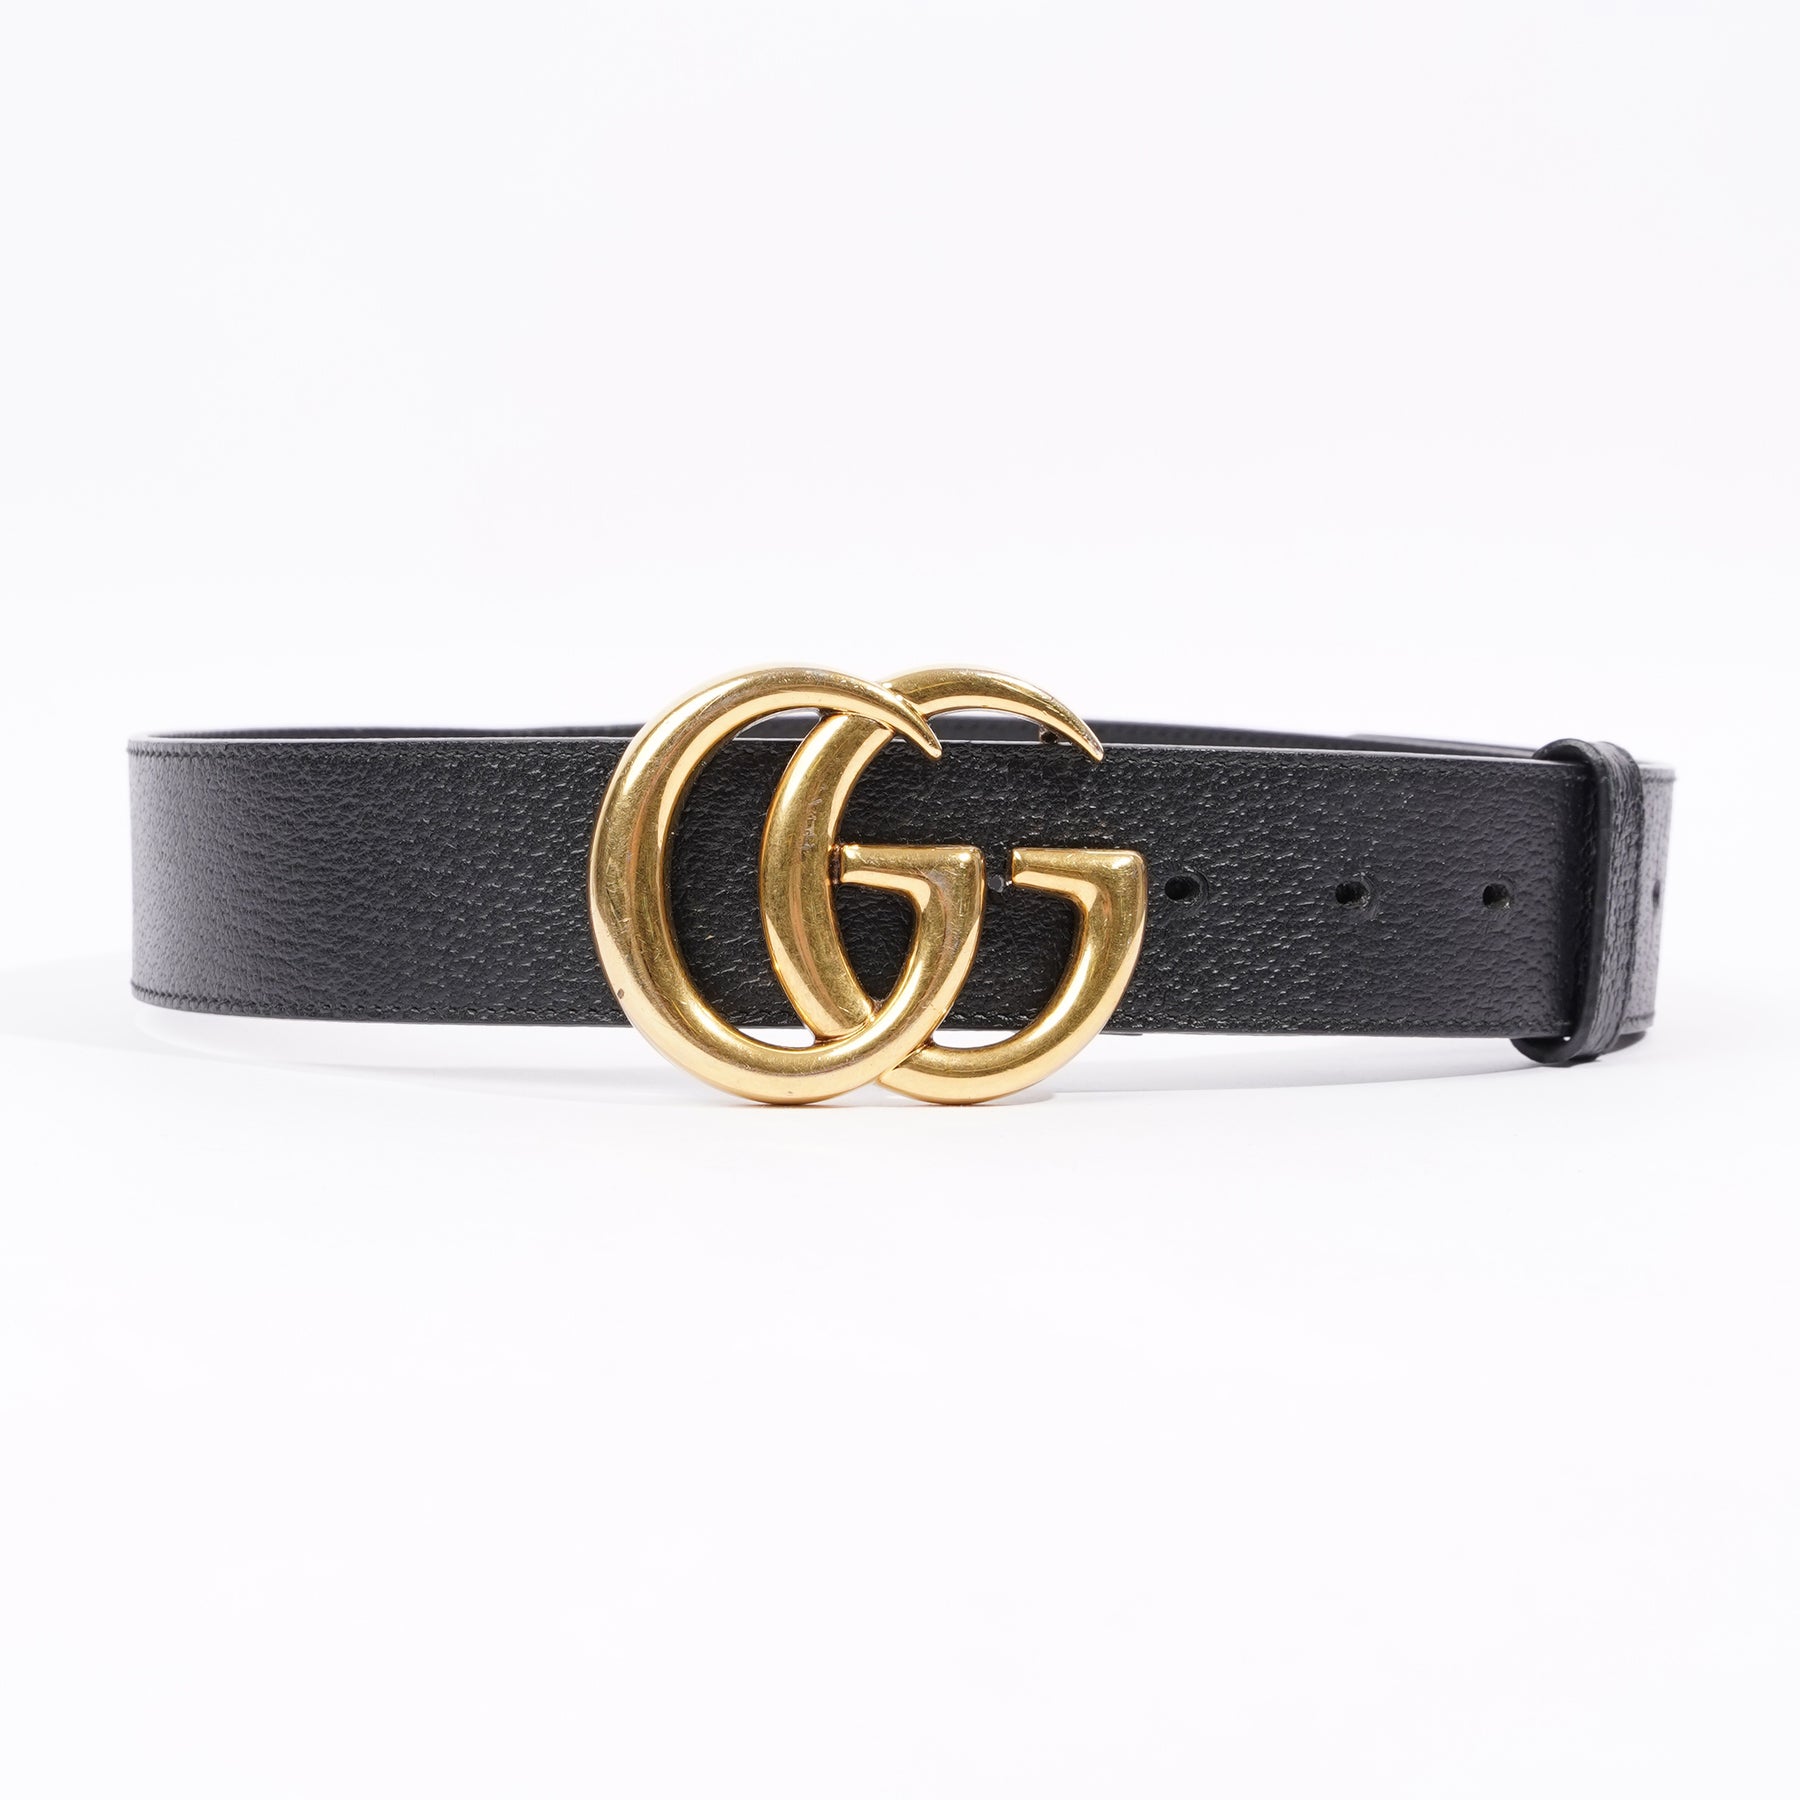 Gucci Womens Marmont GG Buckle Belt Black Leather 80cm - 32